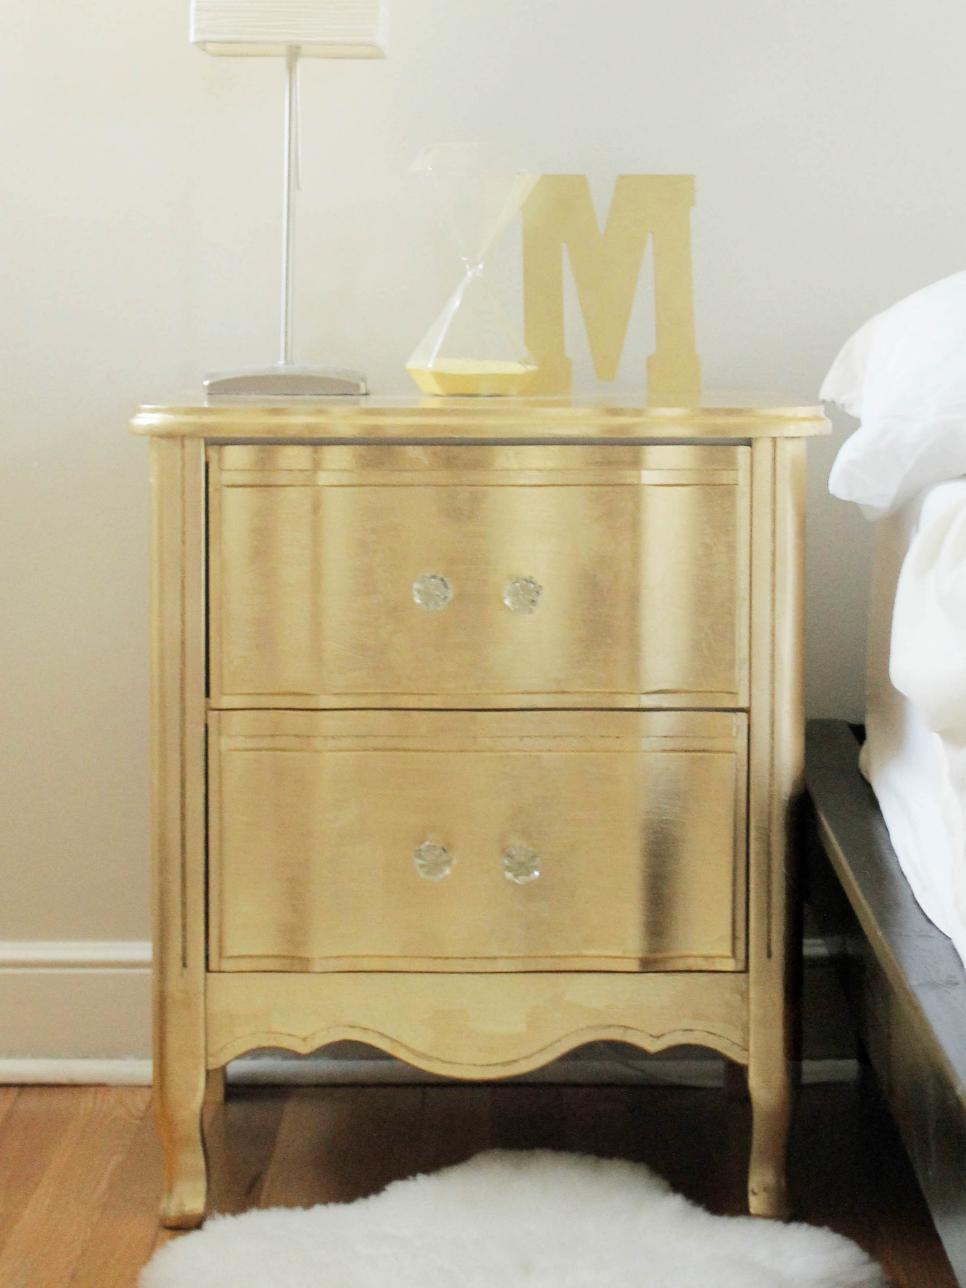 Ideas for Updating an Old Bedside Tables | DIY